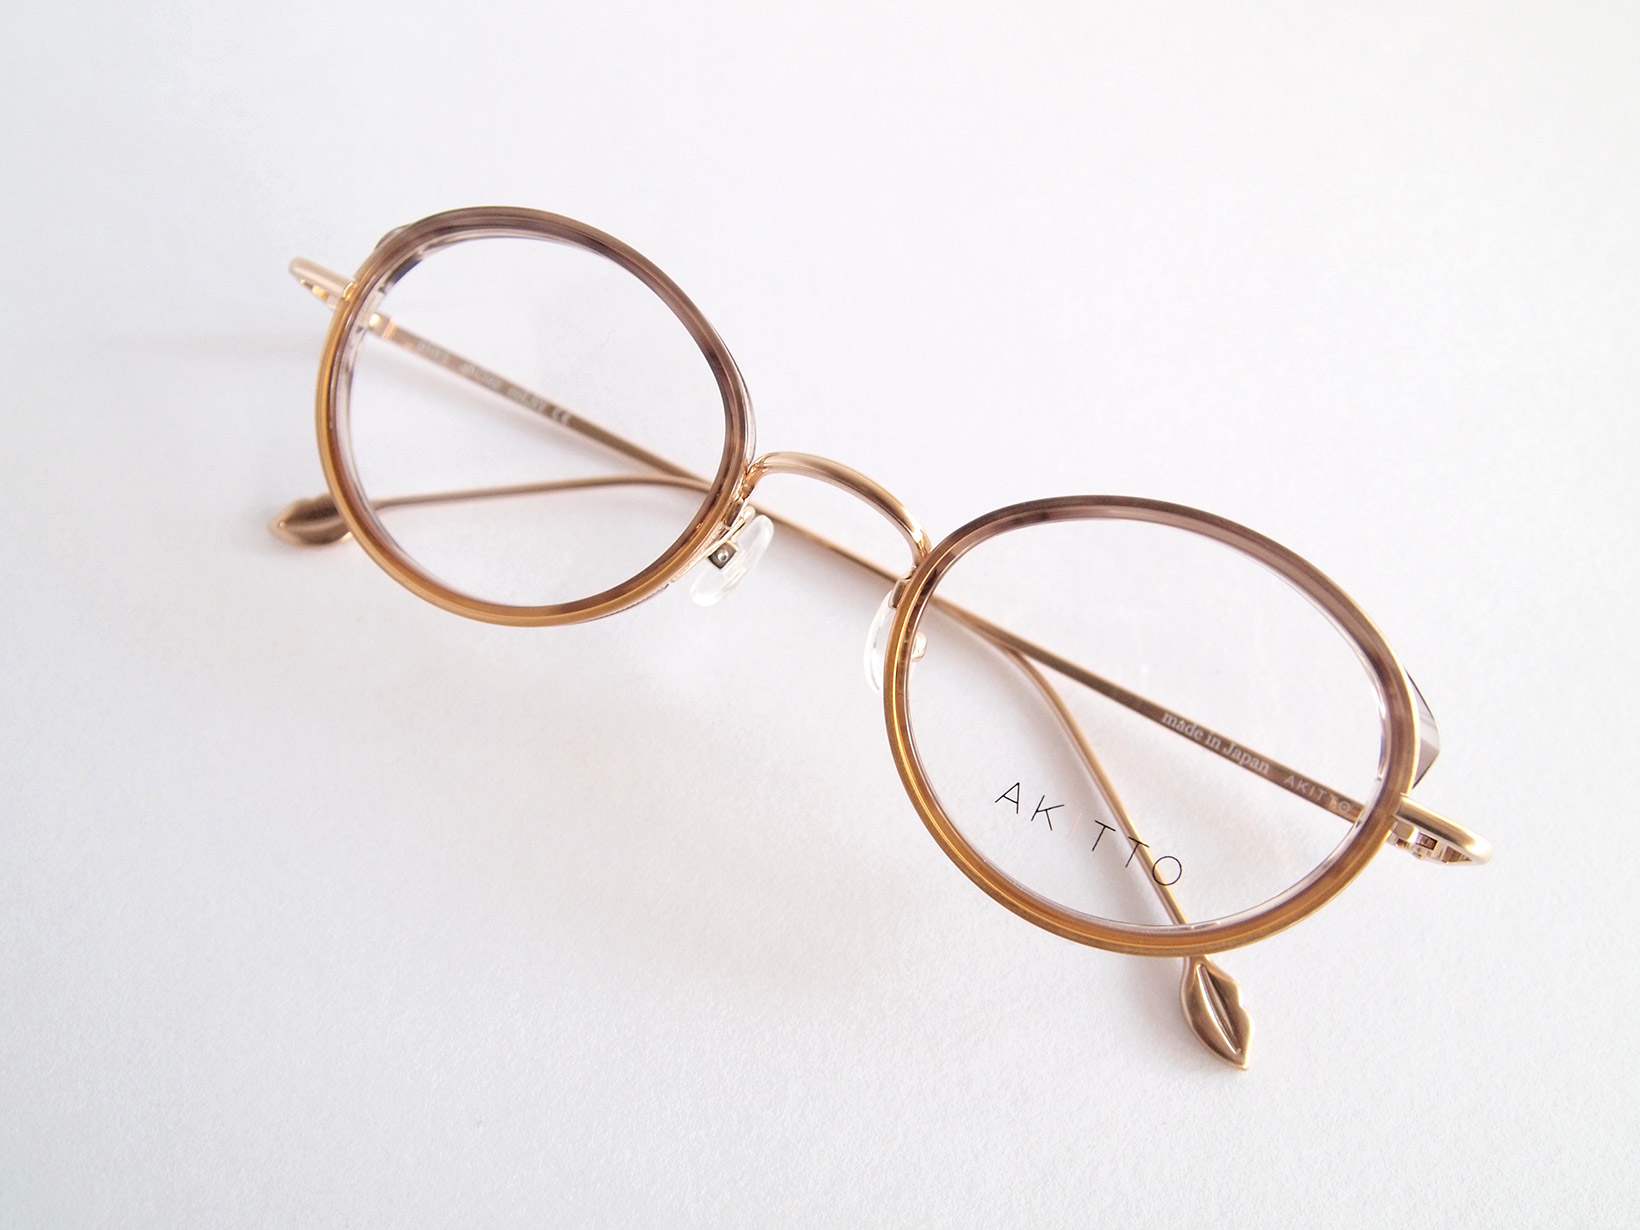 AKITTO 2018-1st pin3 color｜SY size:46□22 material:titanium+acetate price:42,000-(＋tax)